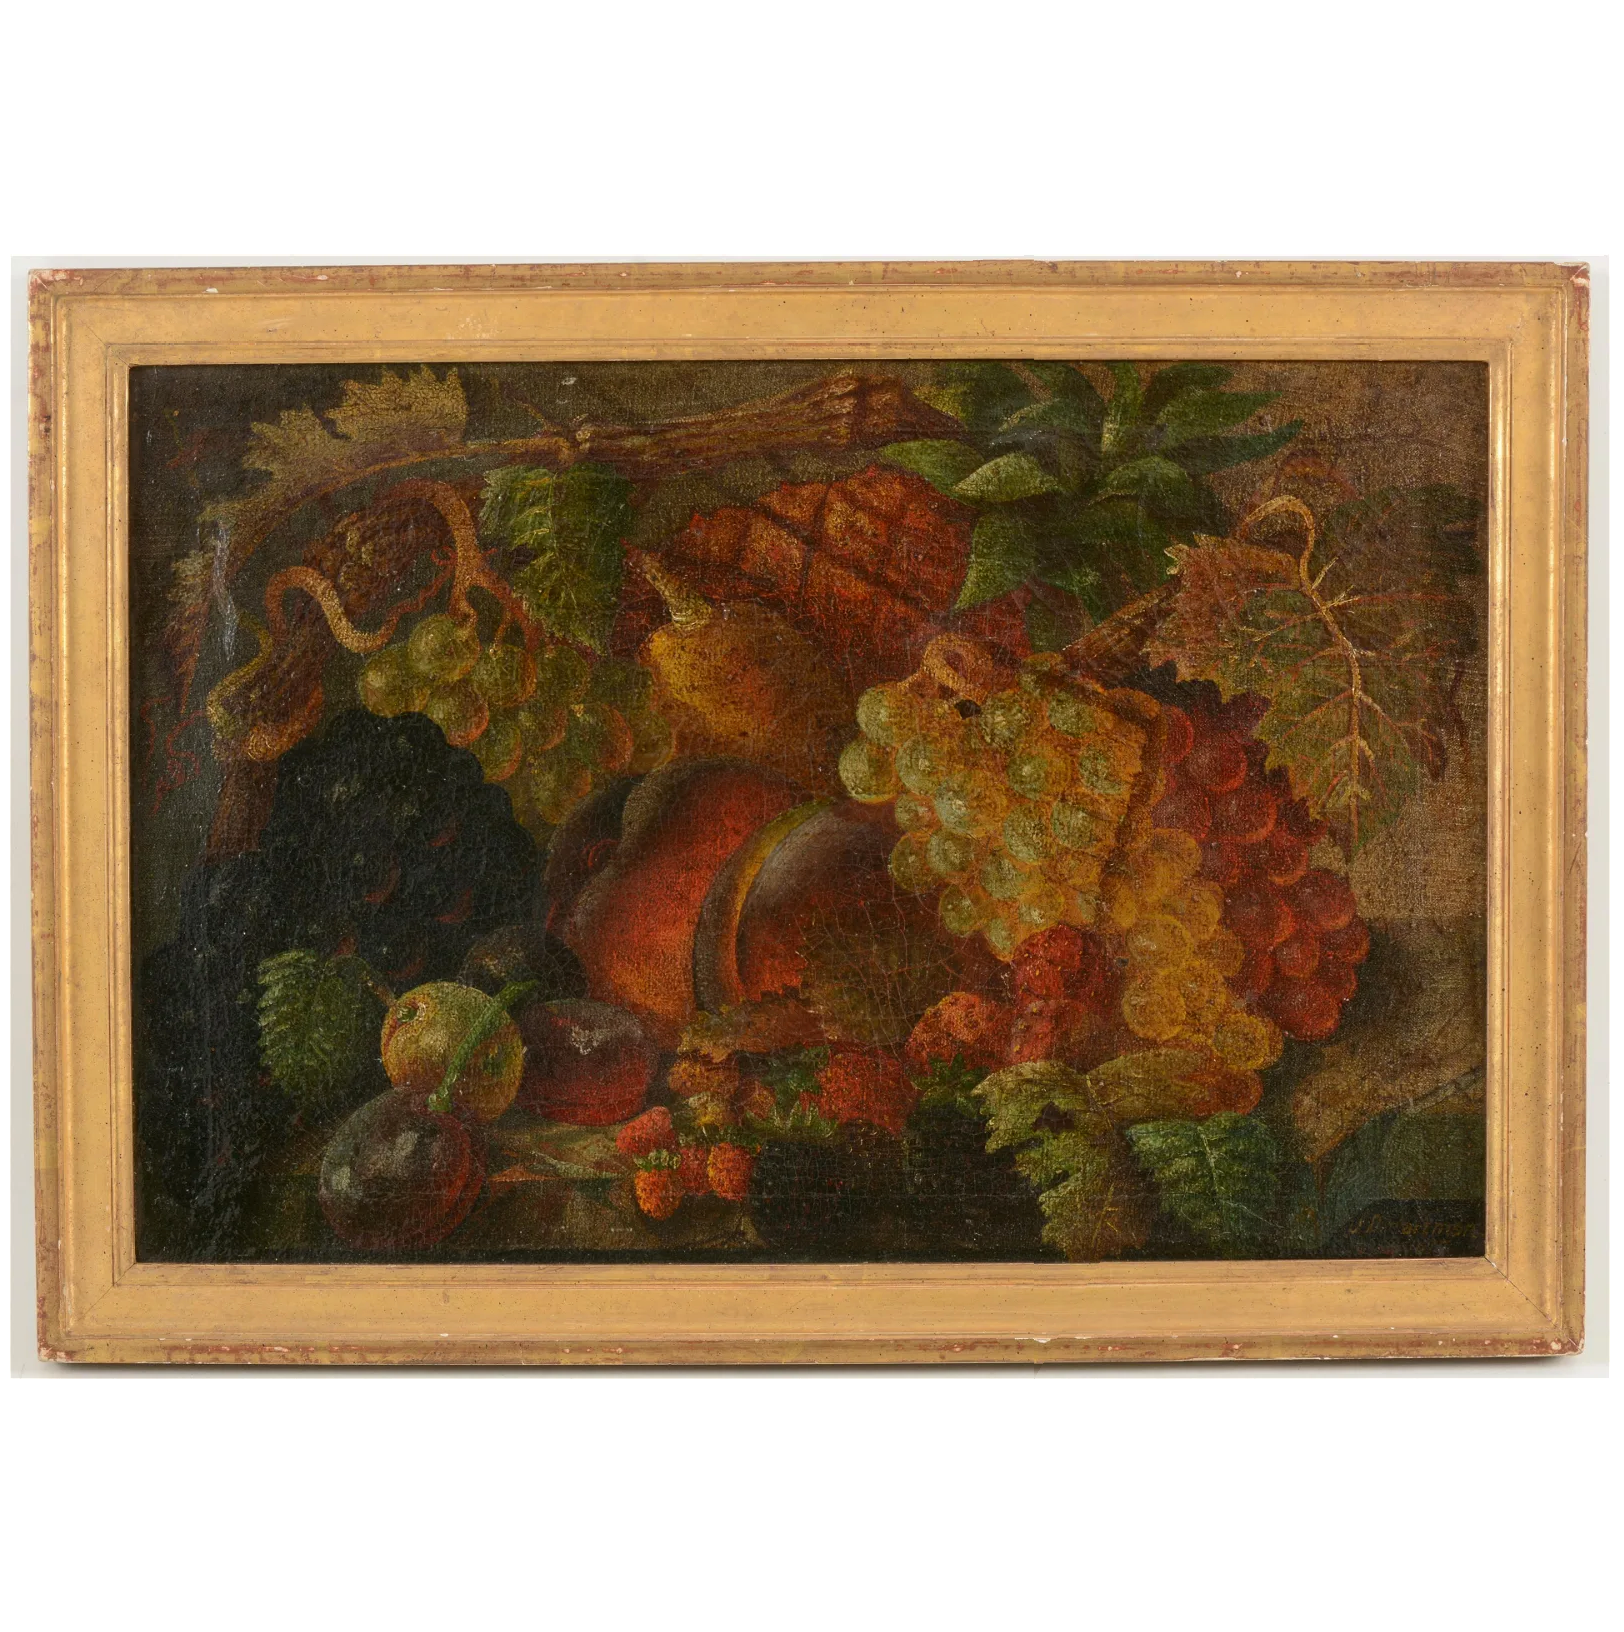 AW587: 19th century American School Still Life With Fruit - Oil on Canvas